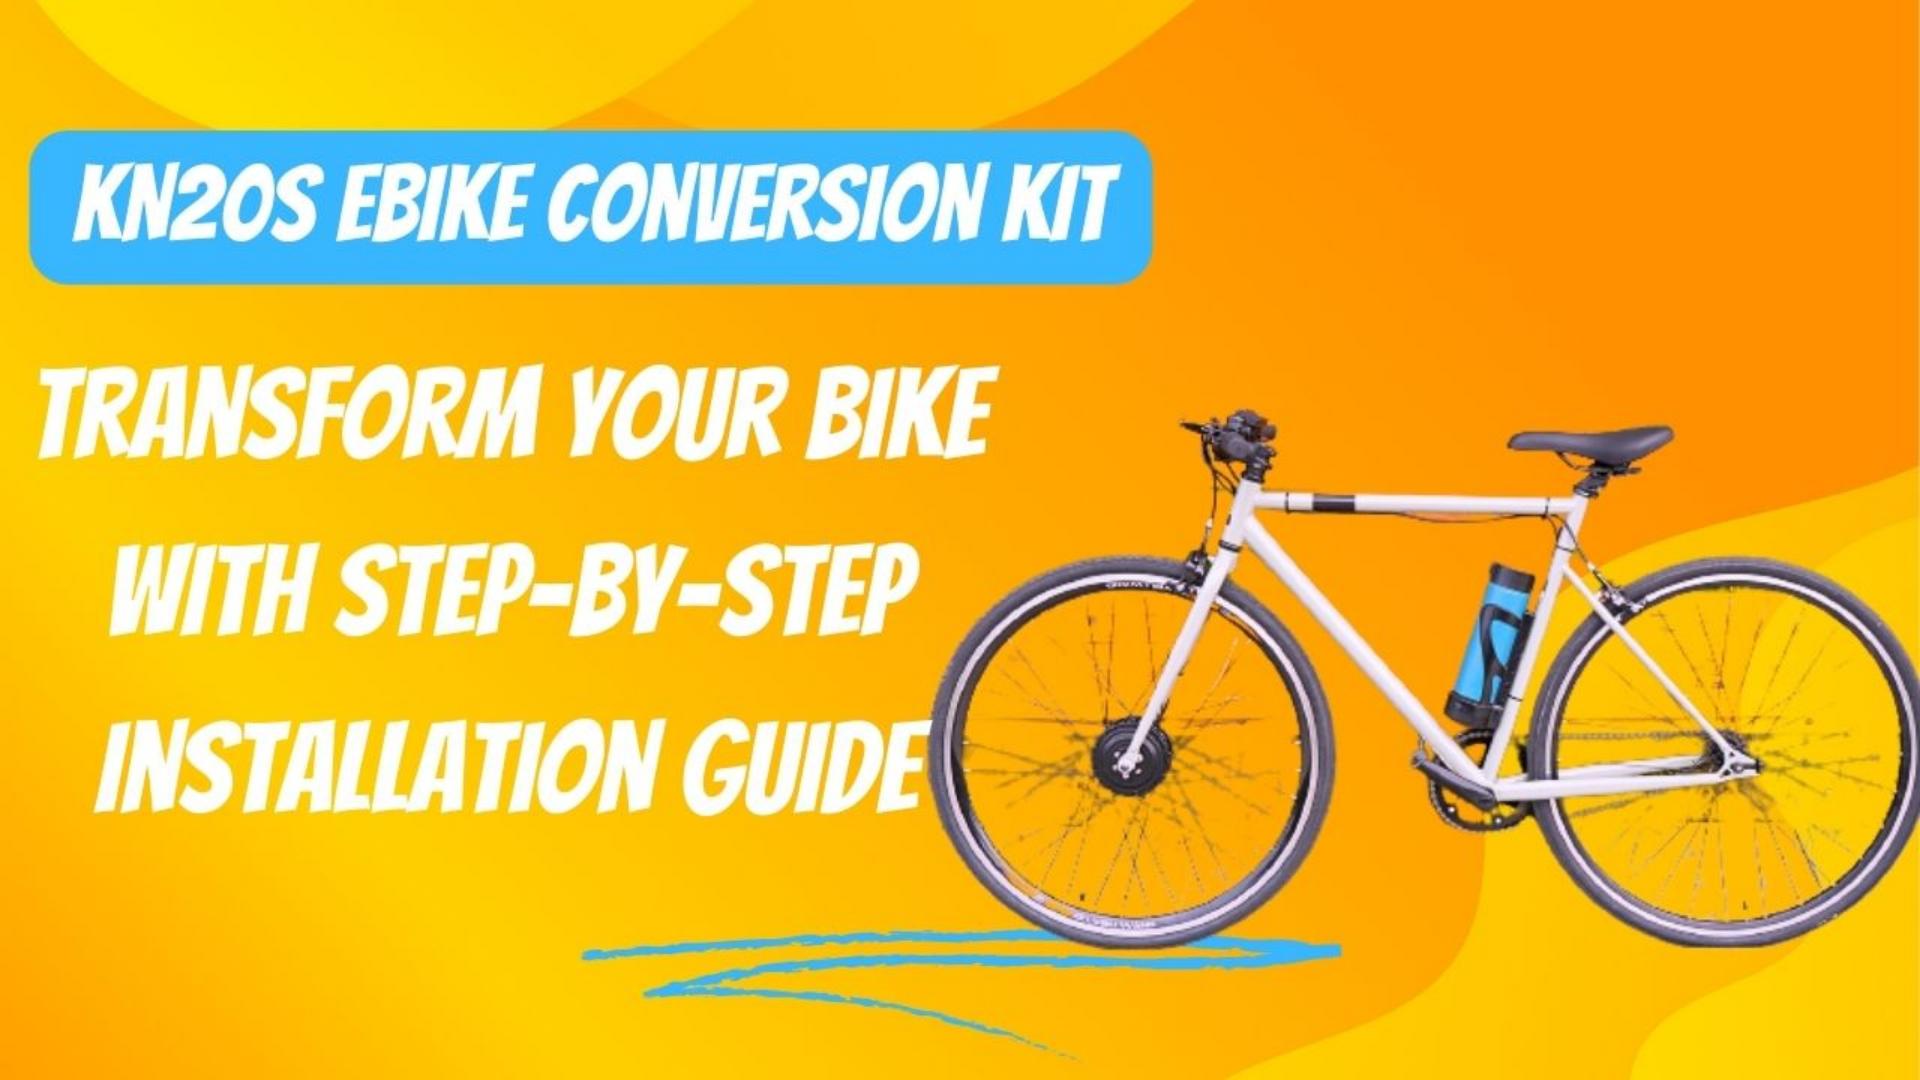 KN20S Ebike Conversion kit/Transform your bike with step-by-step installation guide.